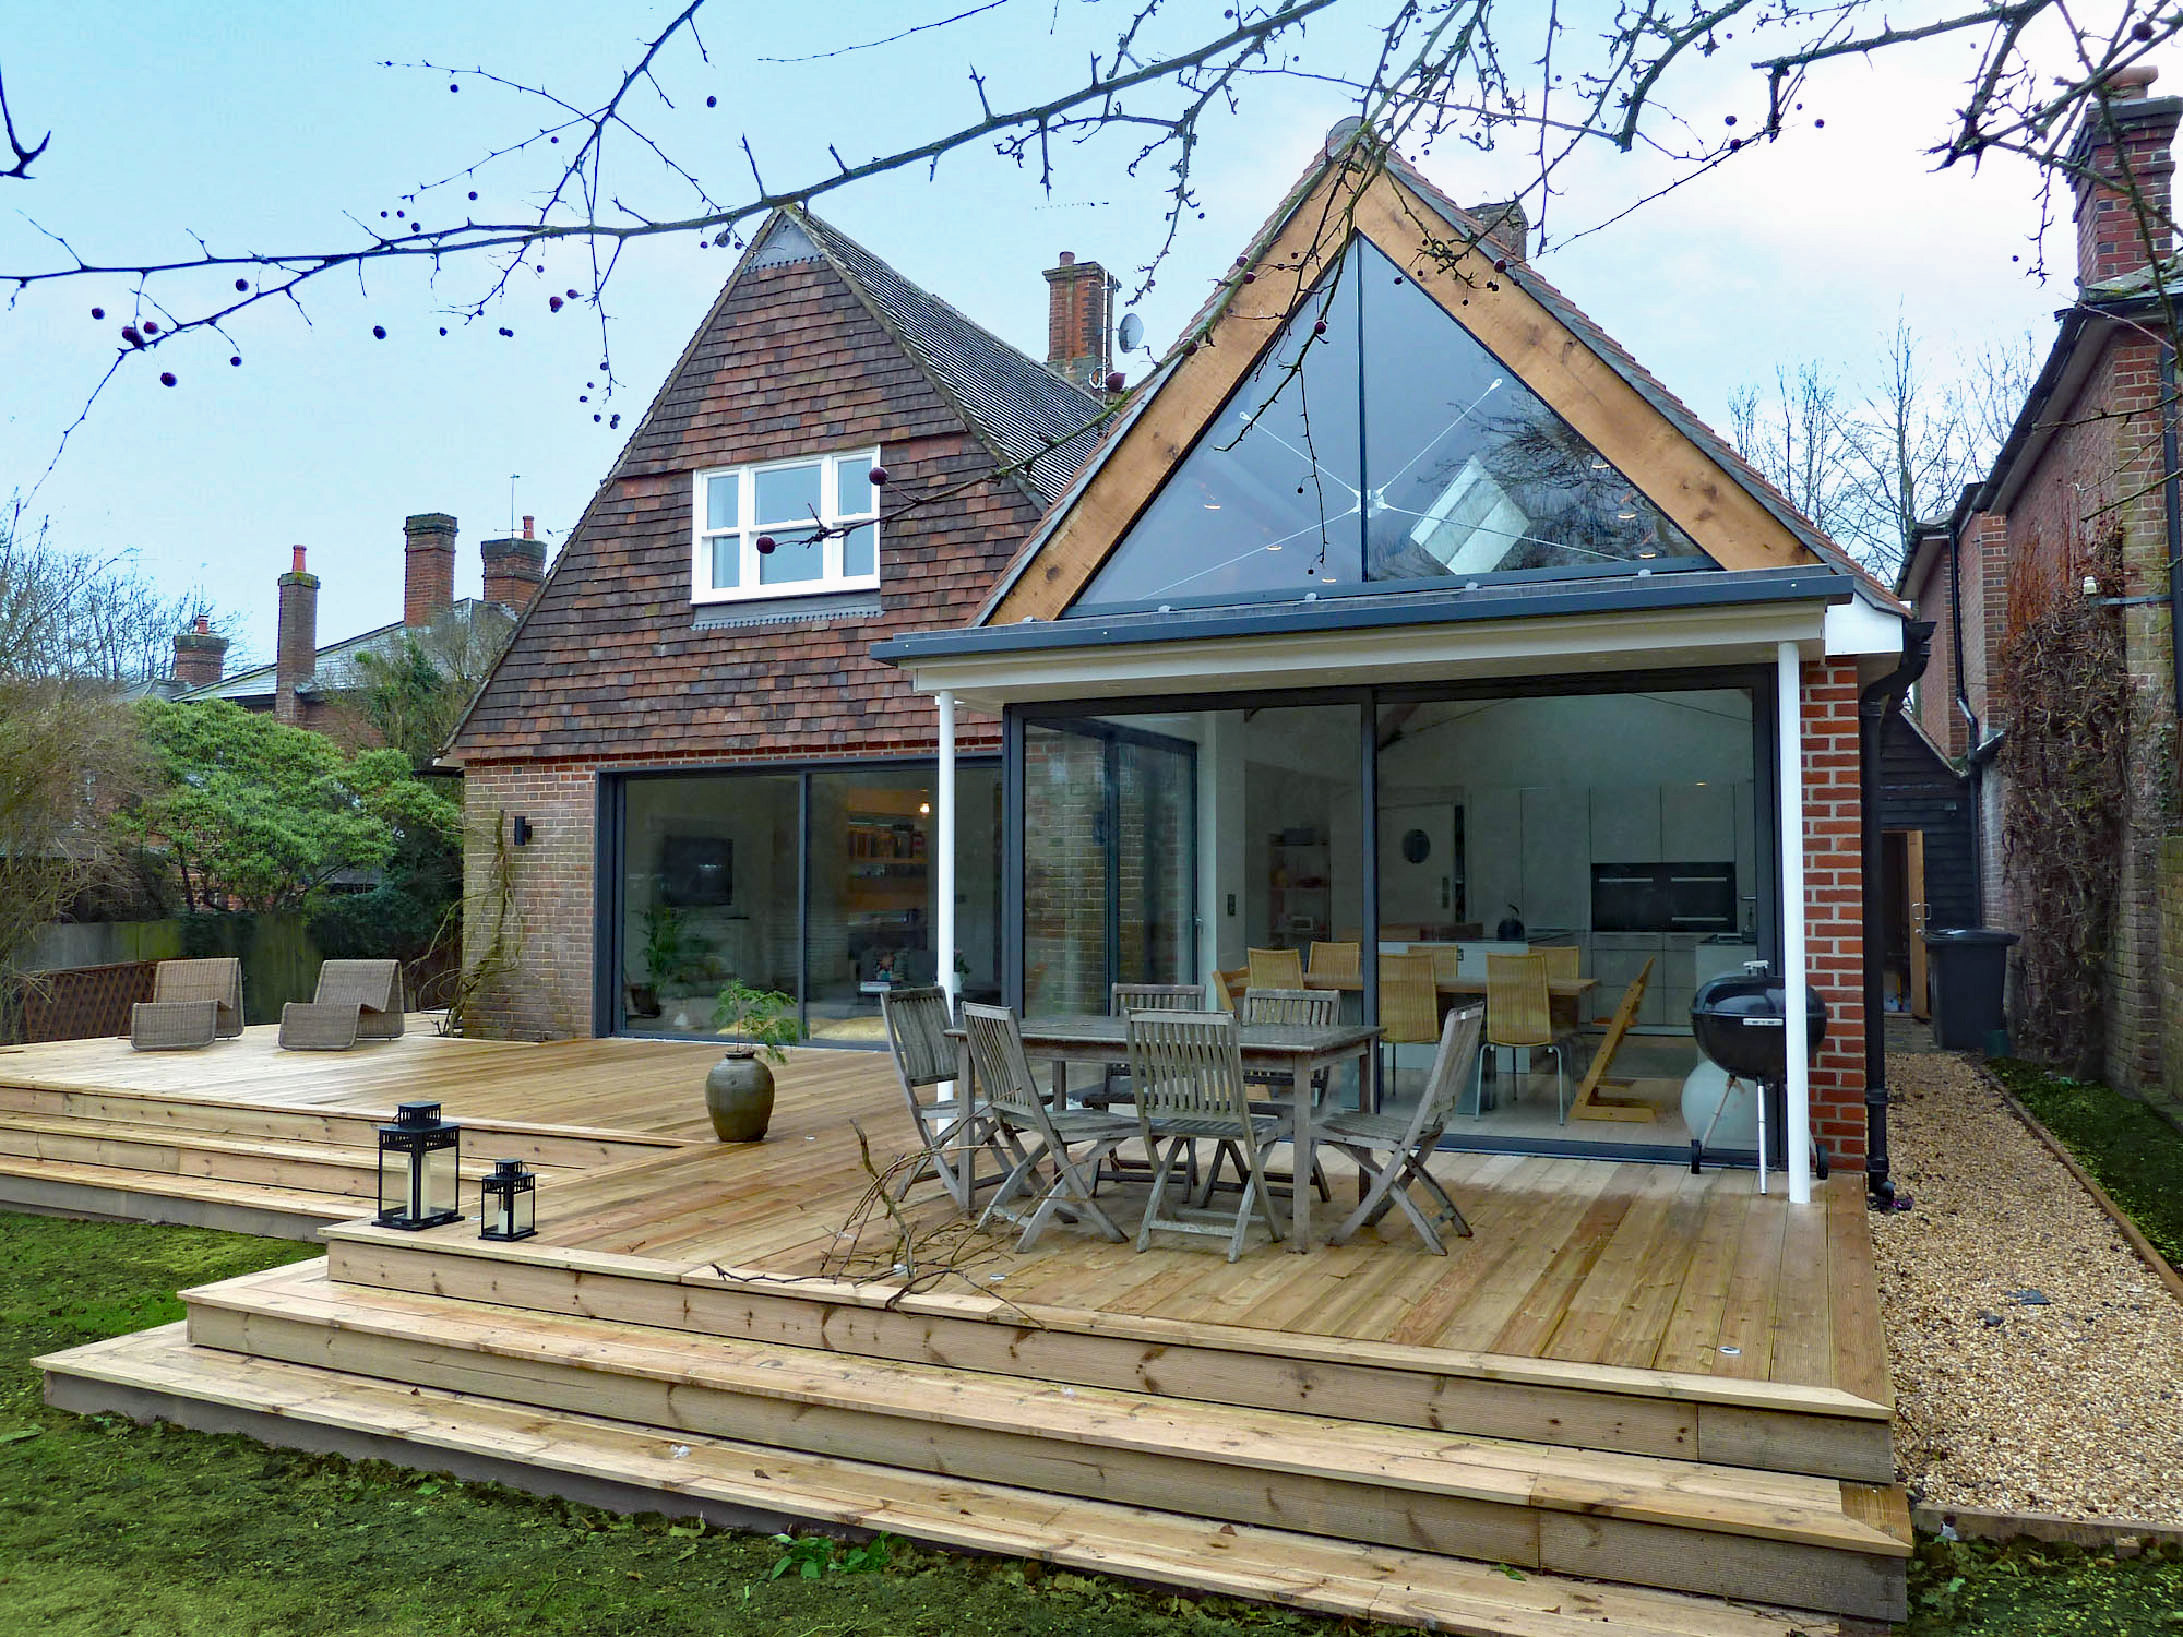 </p> <p>Find your ideal home design pro on designfor-me.com - get matched and see who's interested in your home project. Click image to see more inspiration from our design pros</p> <p>Design by Jennifer, architectural designer from Waverley, South East</p> <p>#architecture #homedesign #modernhomes #homeinspiration #extensions #extensiondesign #extensioninspiration #extensionideas #houseextension #glazing #architecturalglazing #naturallight #slidingdoors </p> <p>